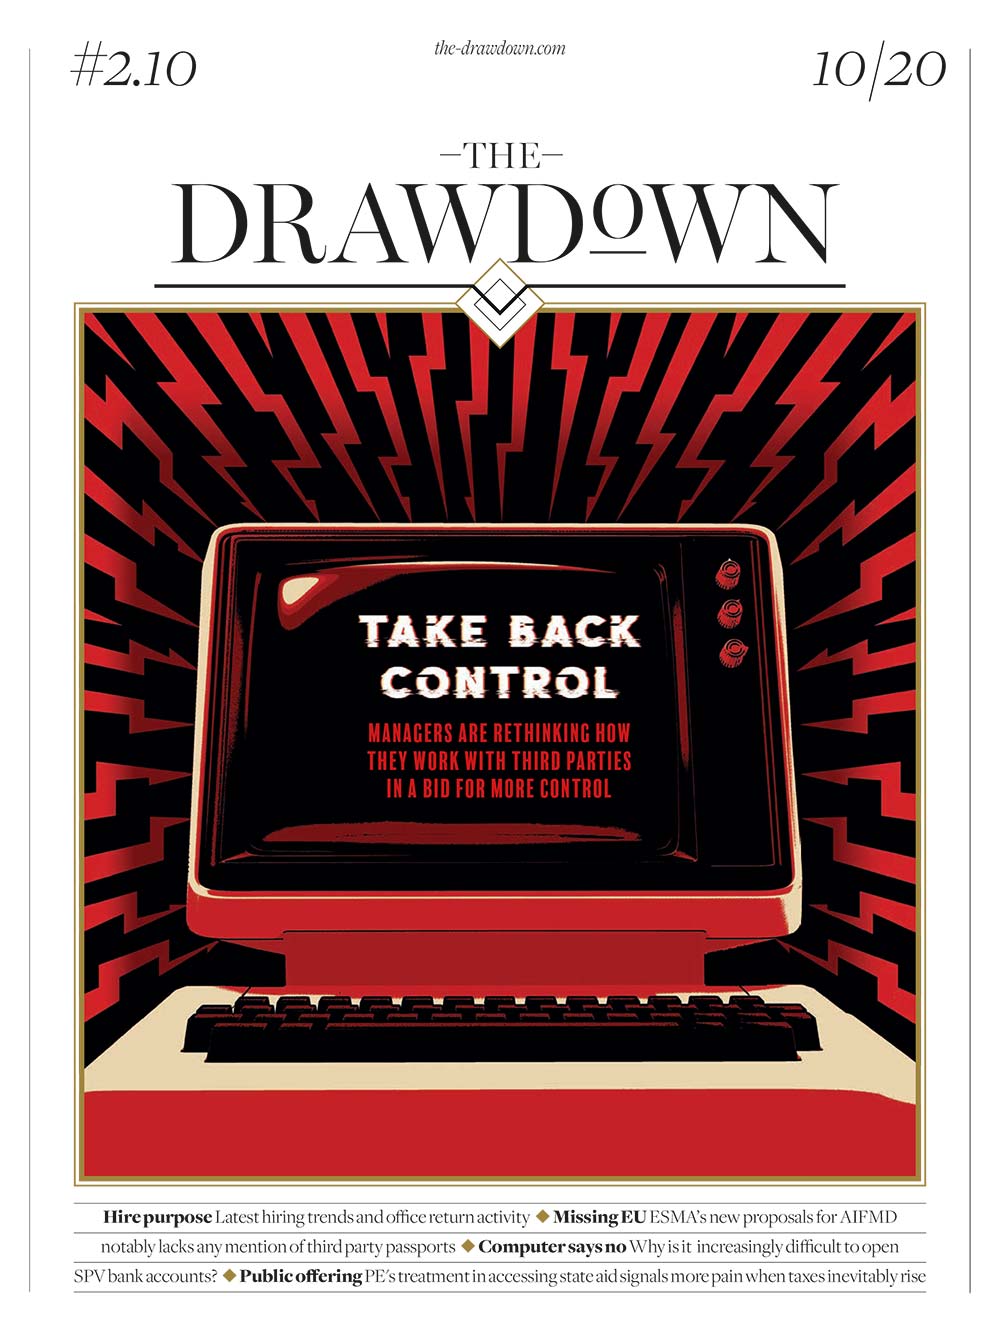 The Drawdown Issue October 2020 Cover